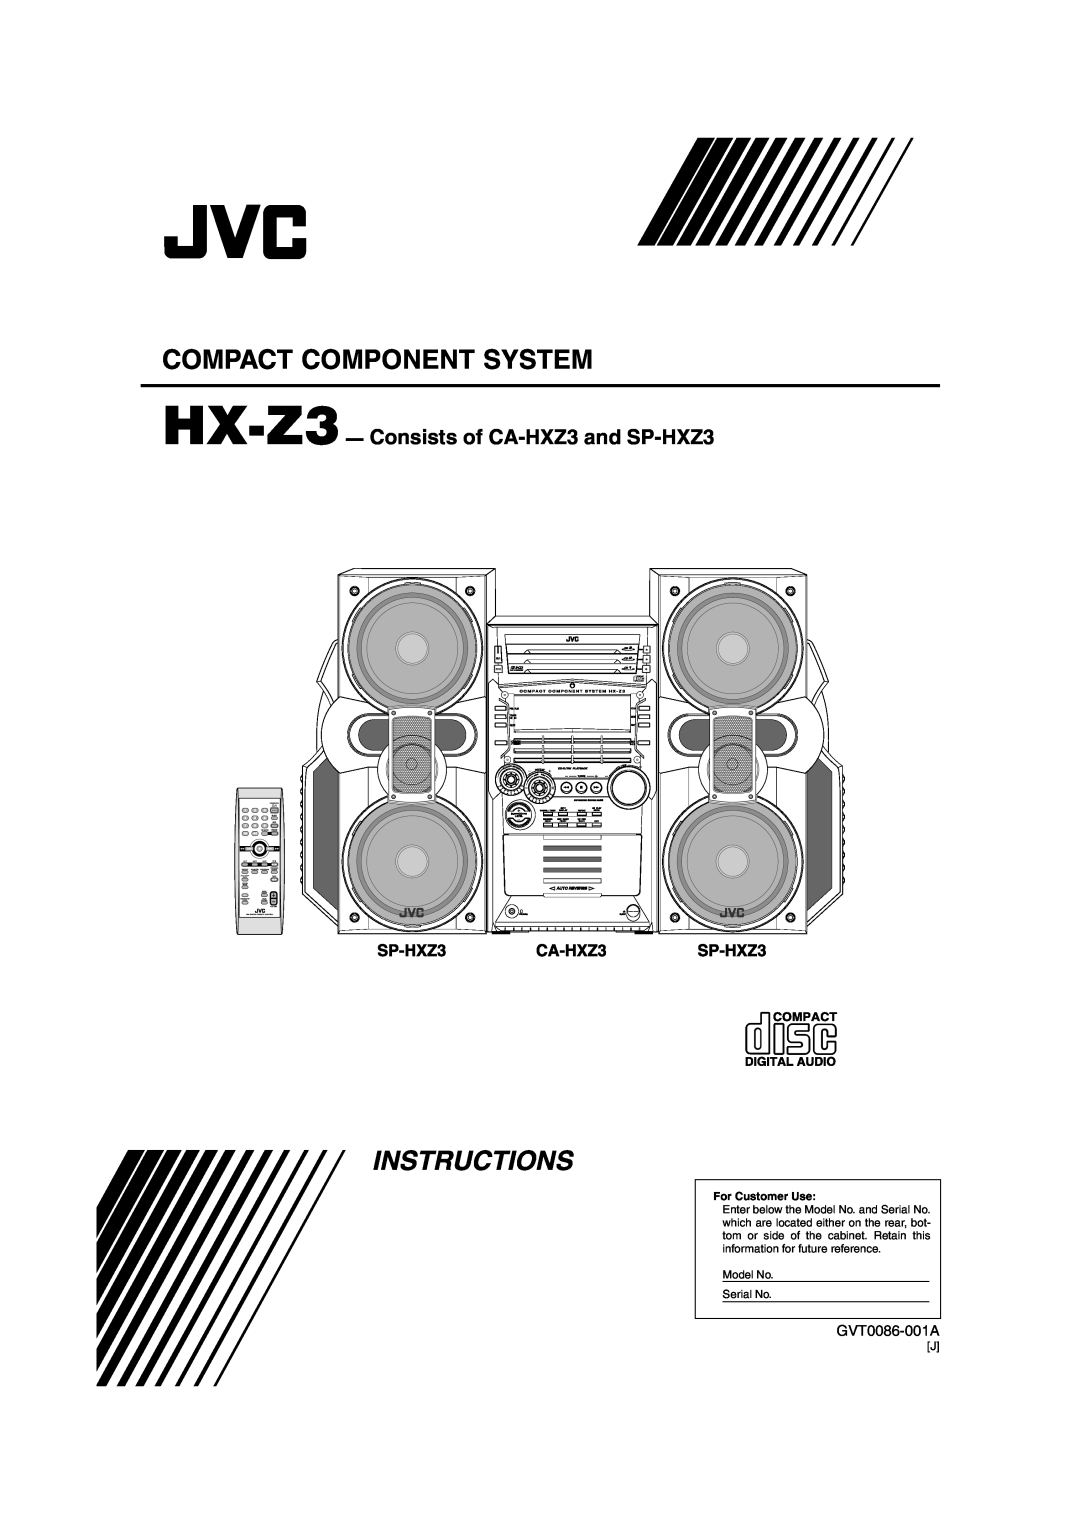 JVC manual HX-Z3- Consists of CA-HXZ3and SP-HXZ3, Compact Component System, Instructions, GVT0086-001A, Olume, Eset 